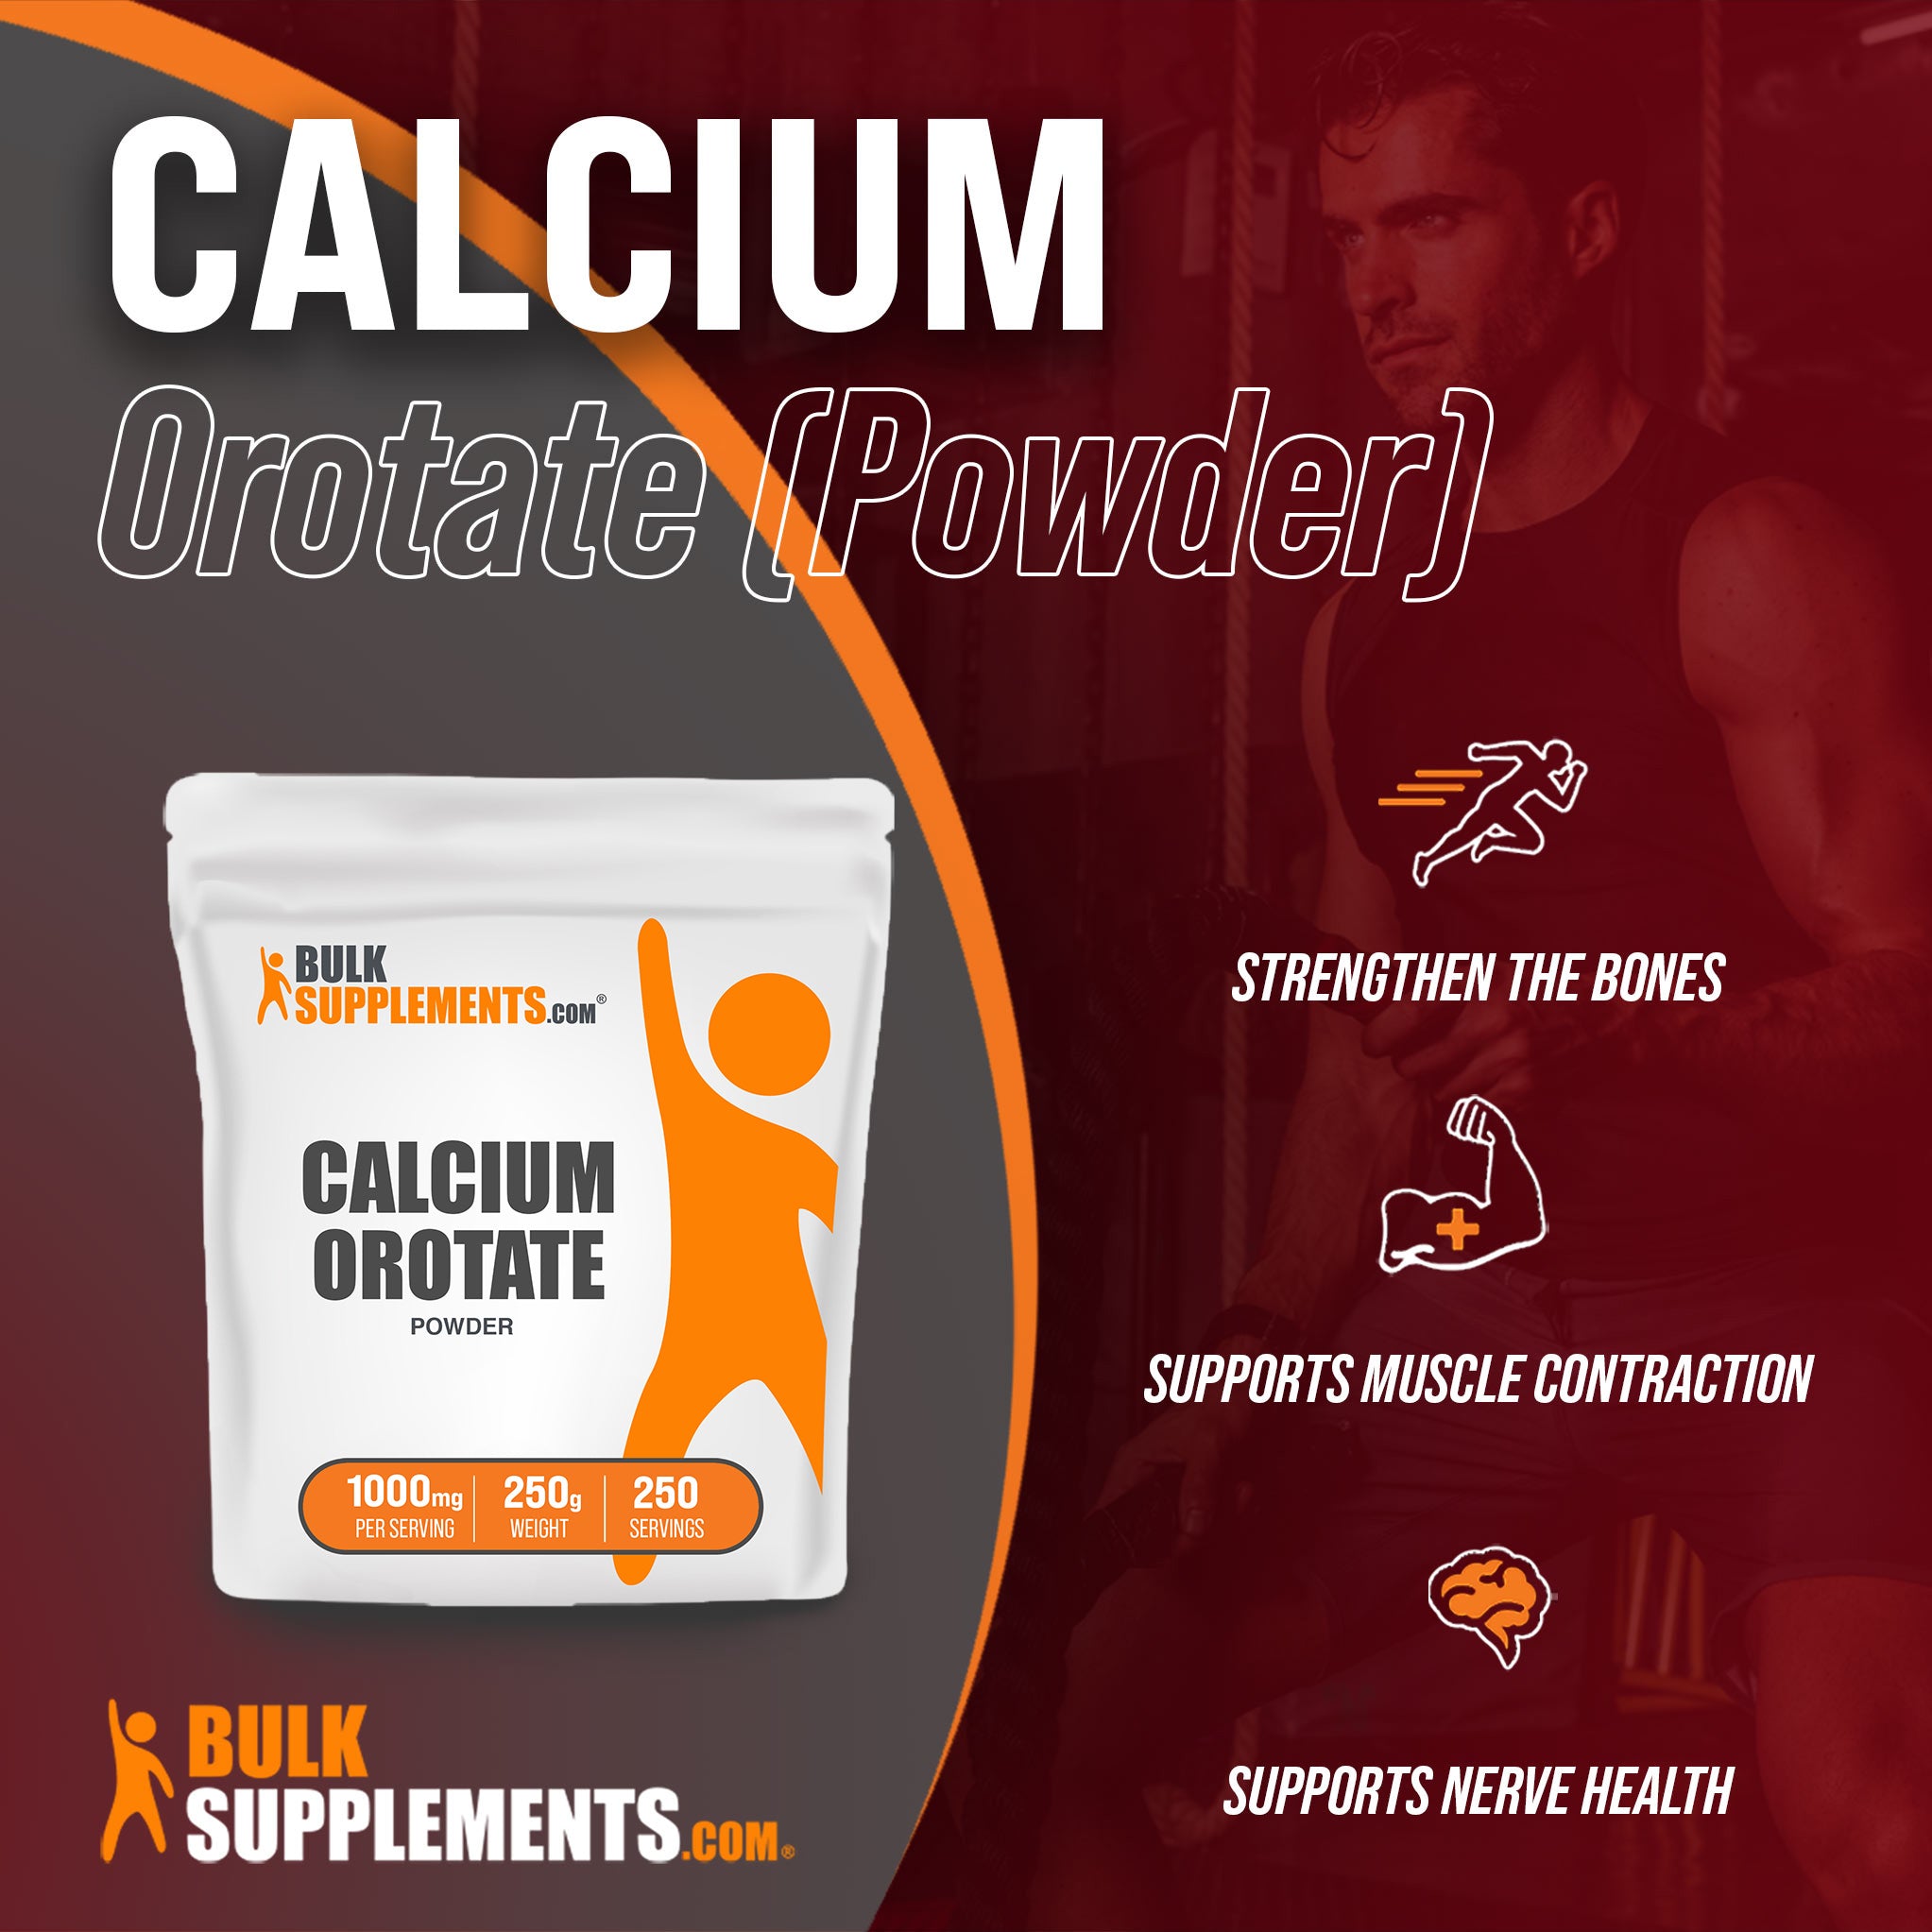 Benefits of Calcium Orotate Powder; strengthen the bones, supports muscle contraction, supports nerve health